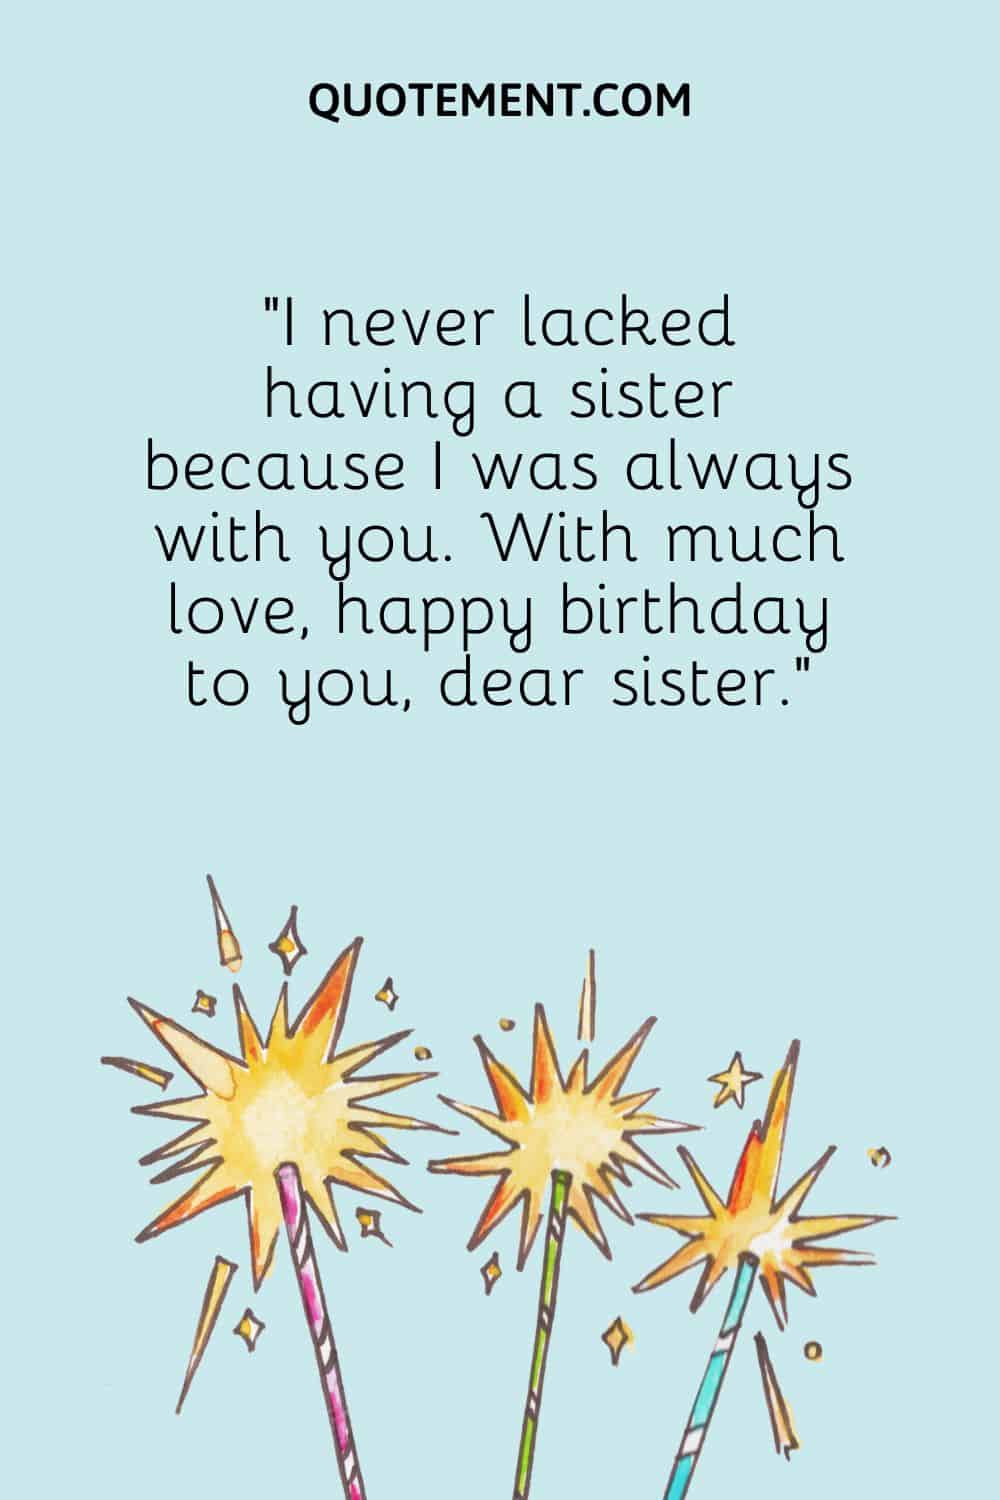 I never lacked having a sister because I was always with you